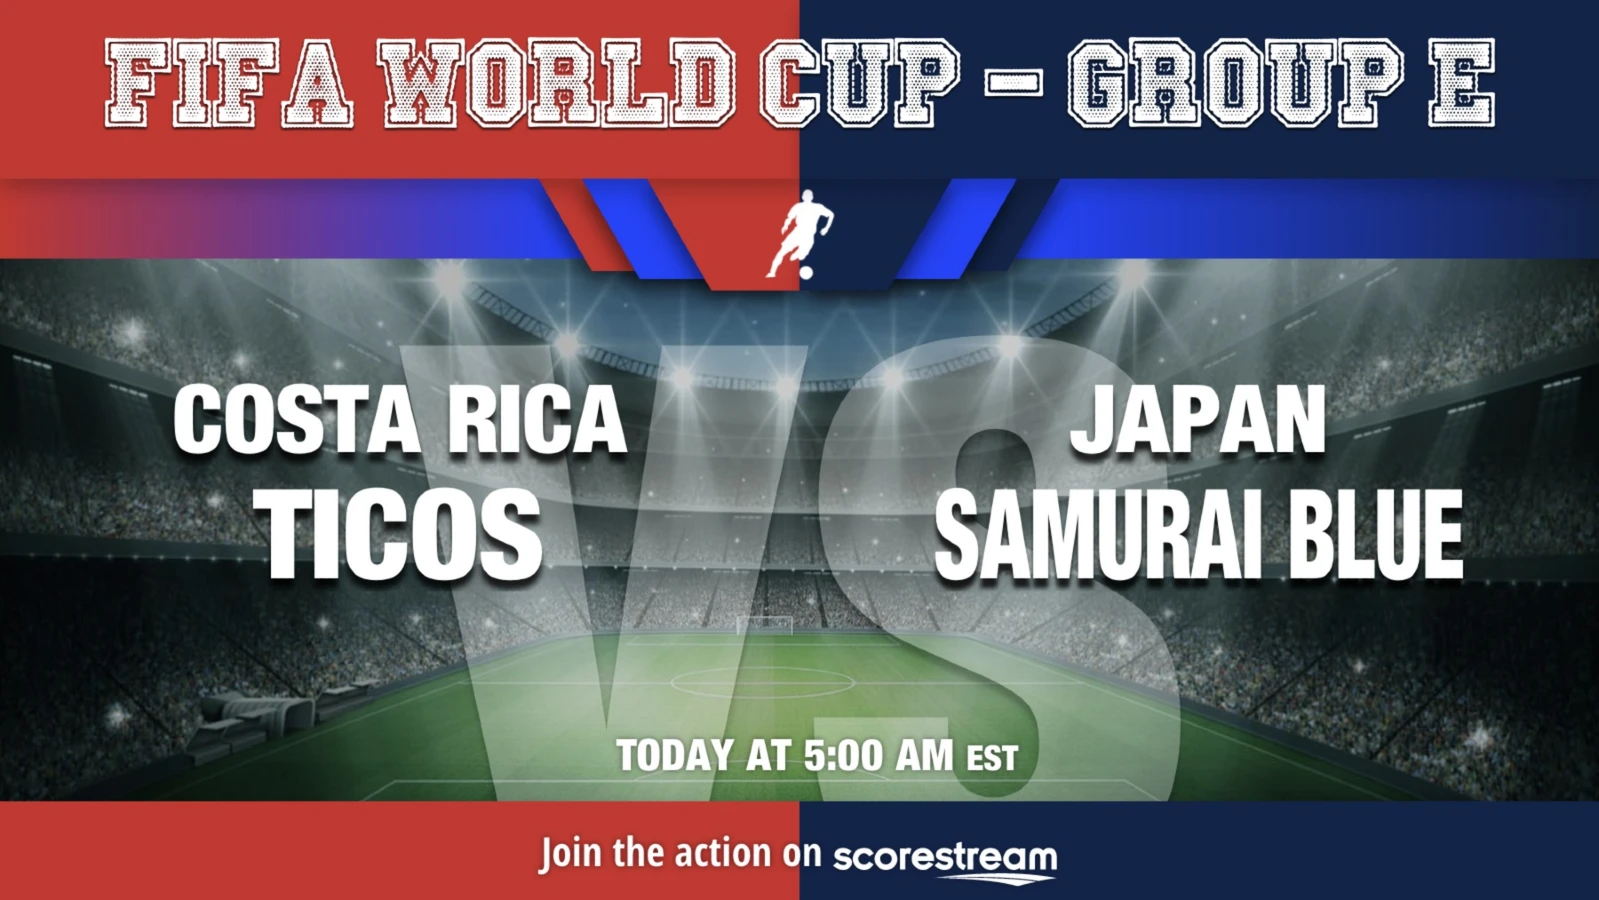 How to Watch Japan vs Costa Rica: Live Stream, TV Channel, Teams, Start Time